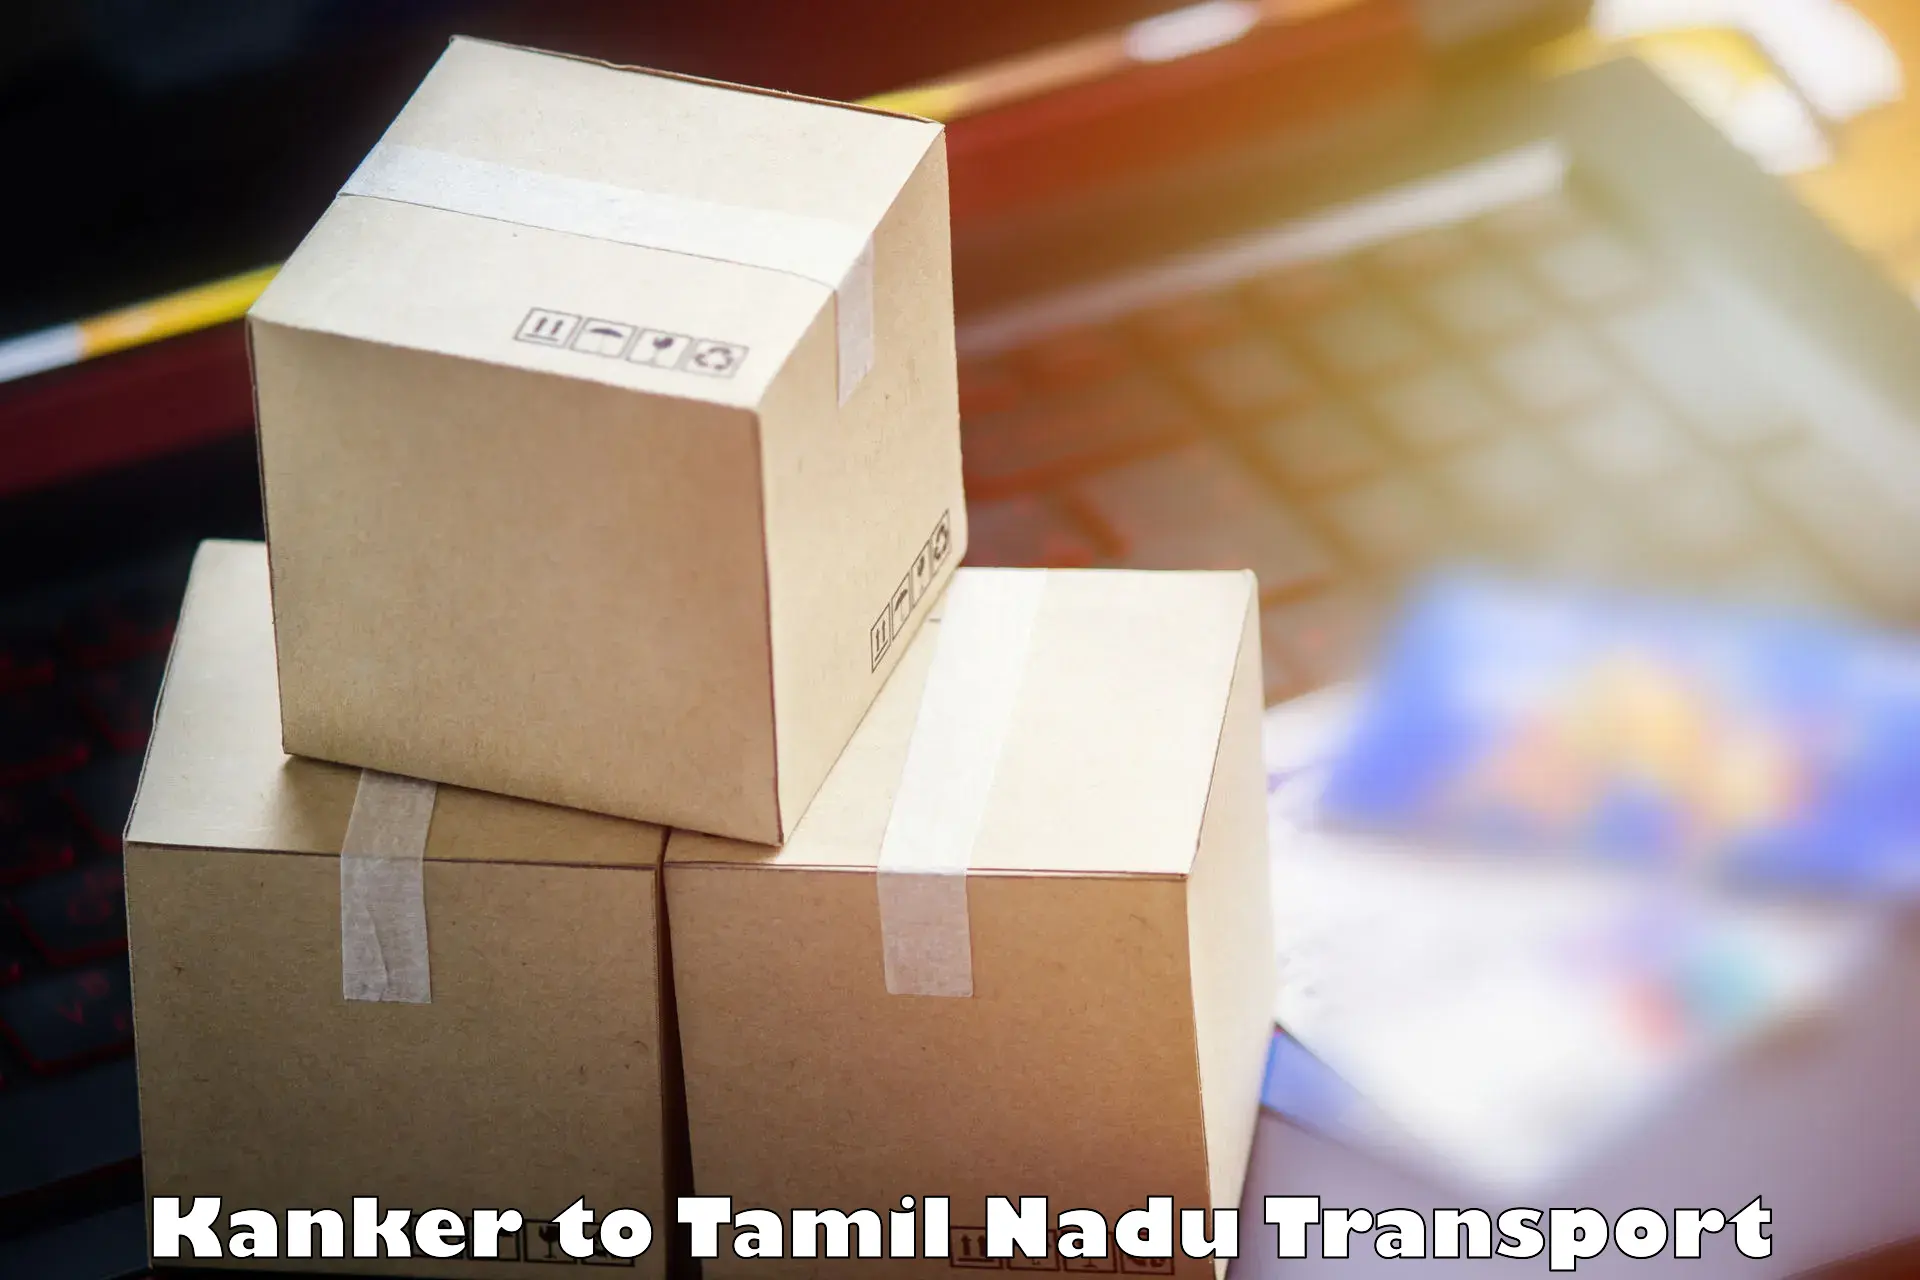 Shipping partner in Kanker to Cuddalore